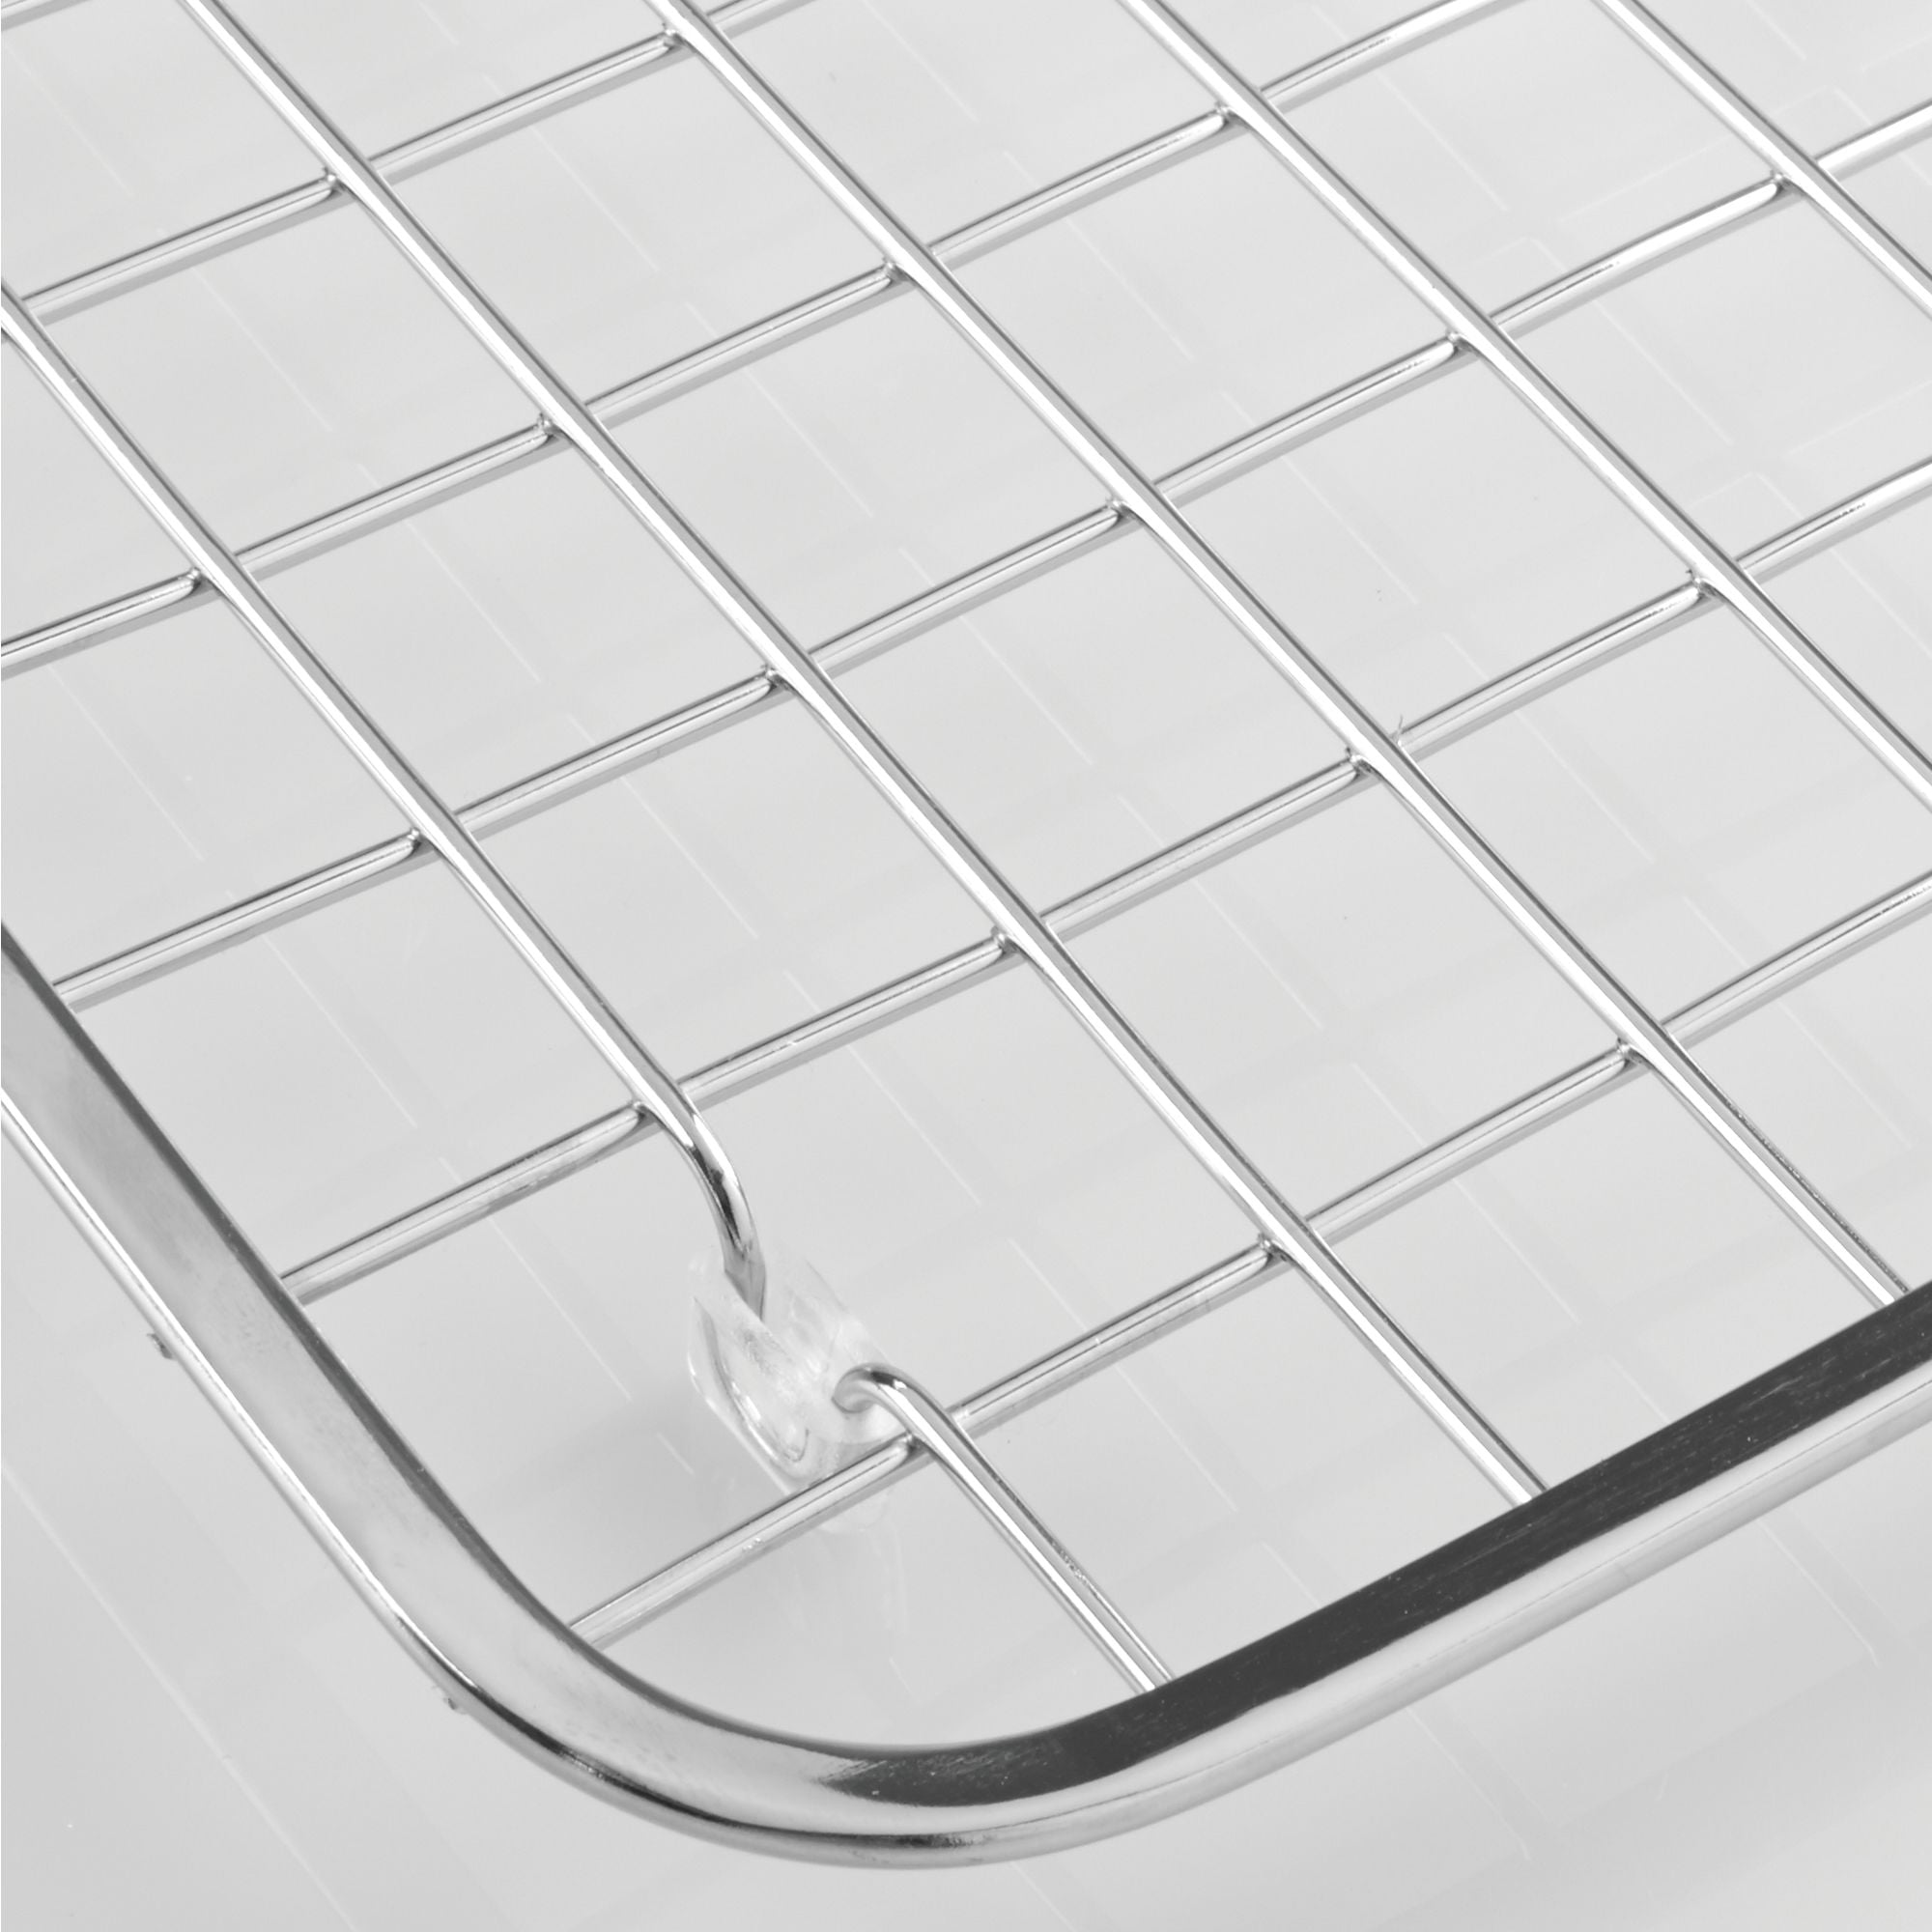 Idesign Gia Kitchen Sink Mat Protector